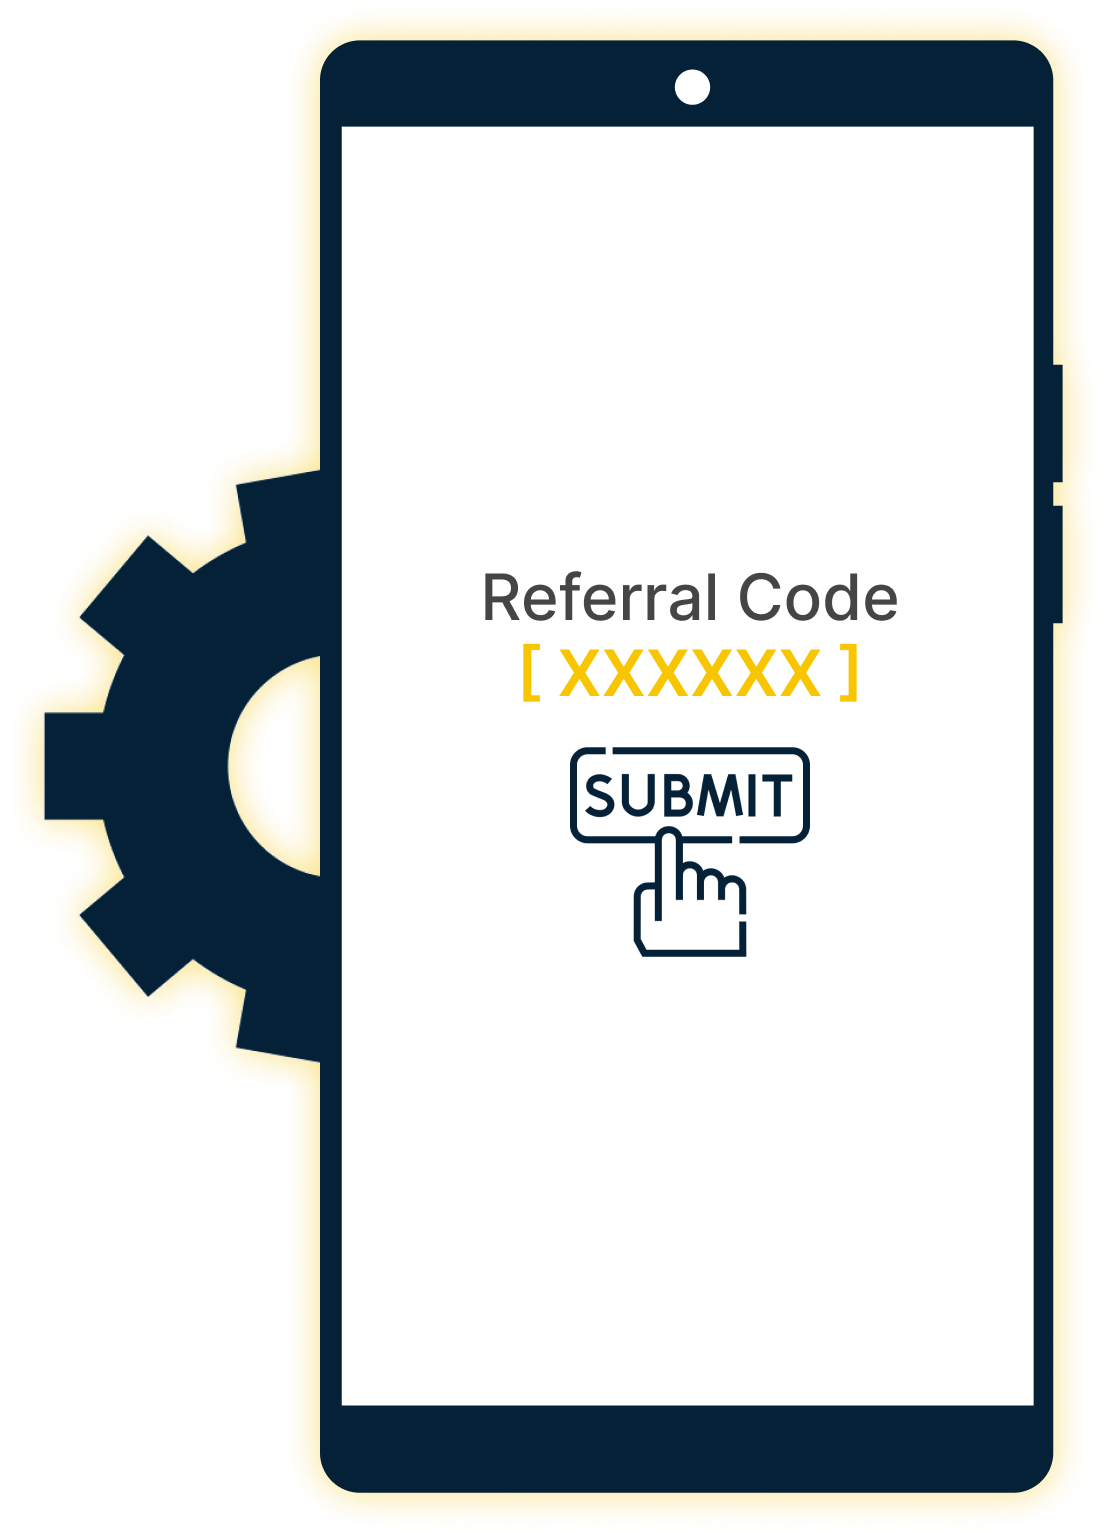 Submit the Referral Code.